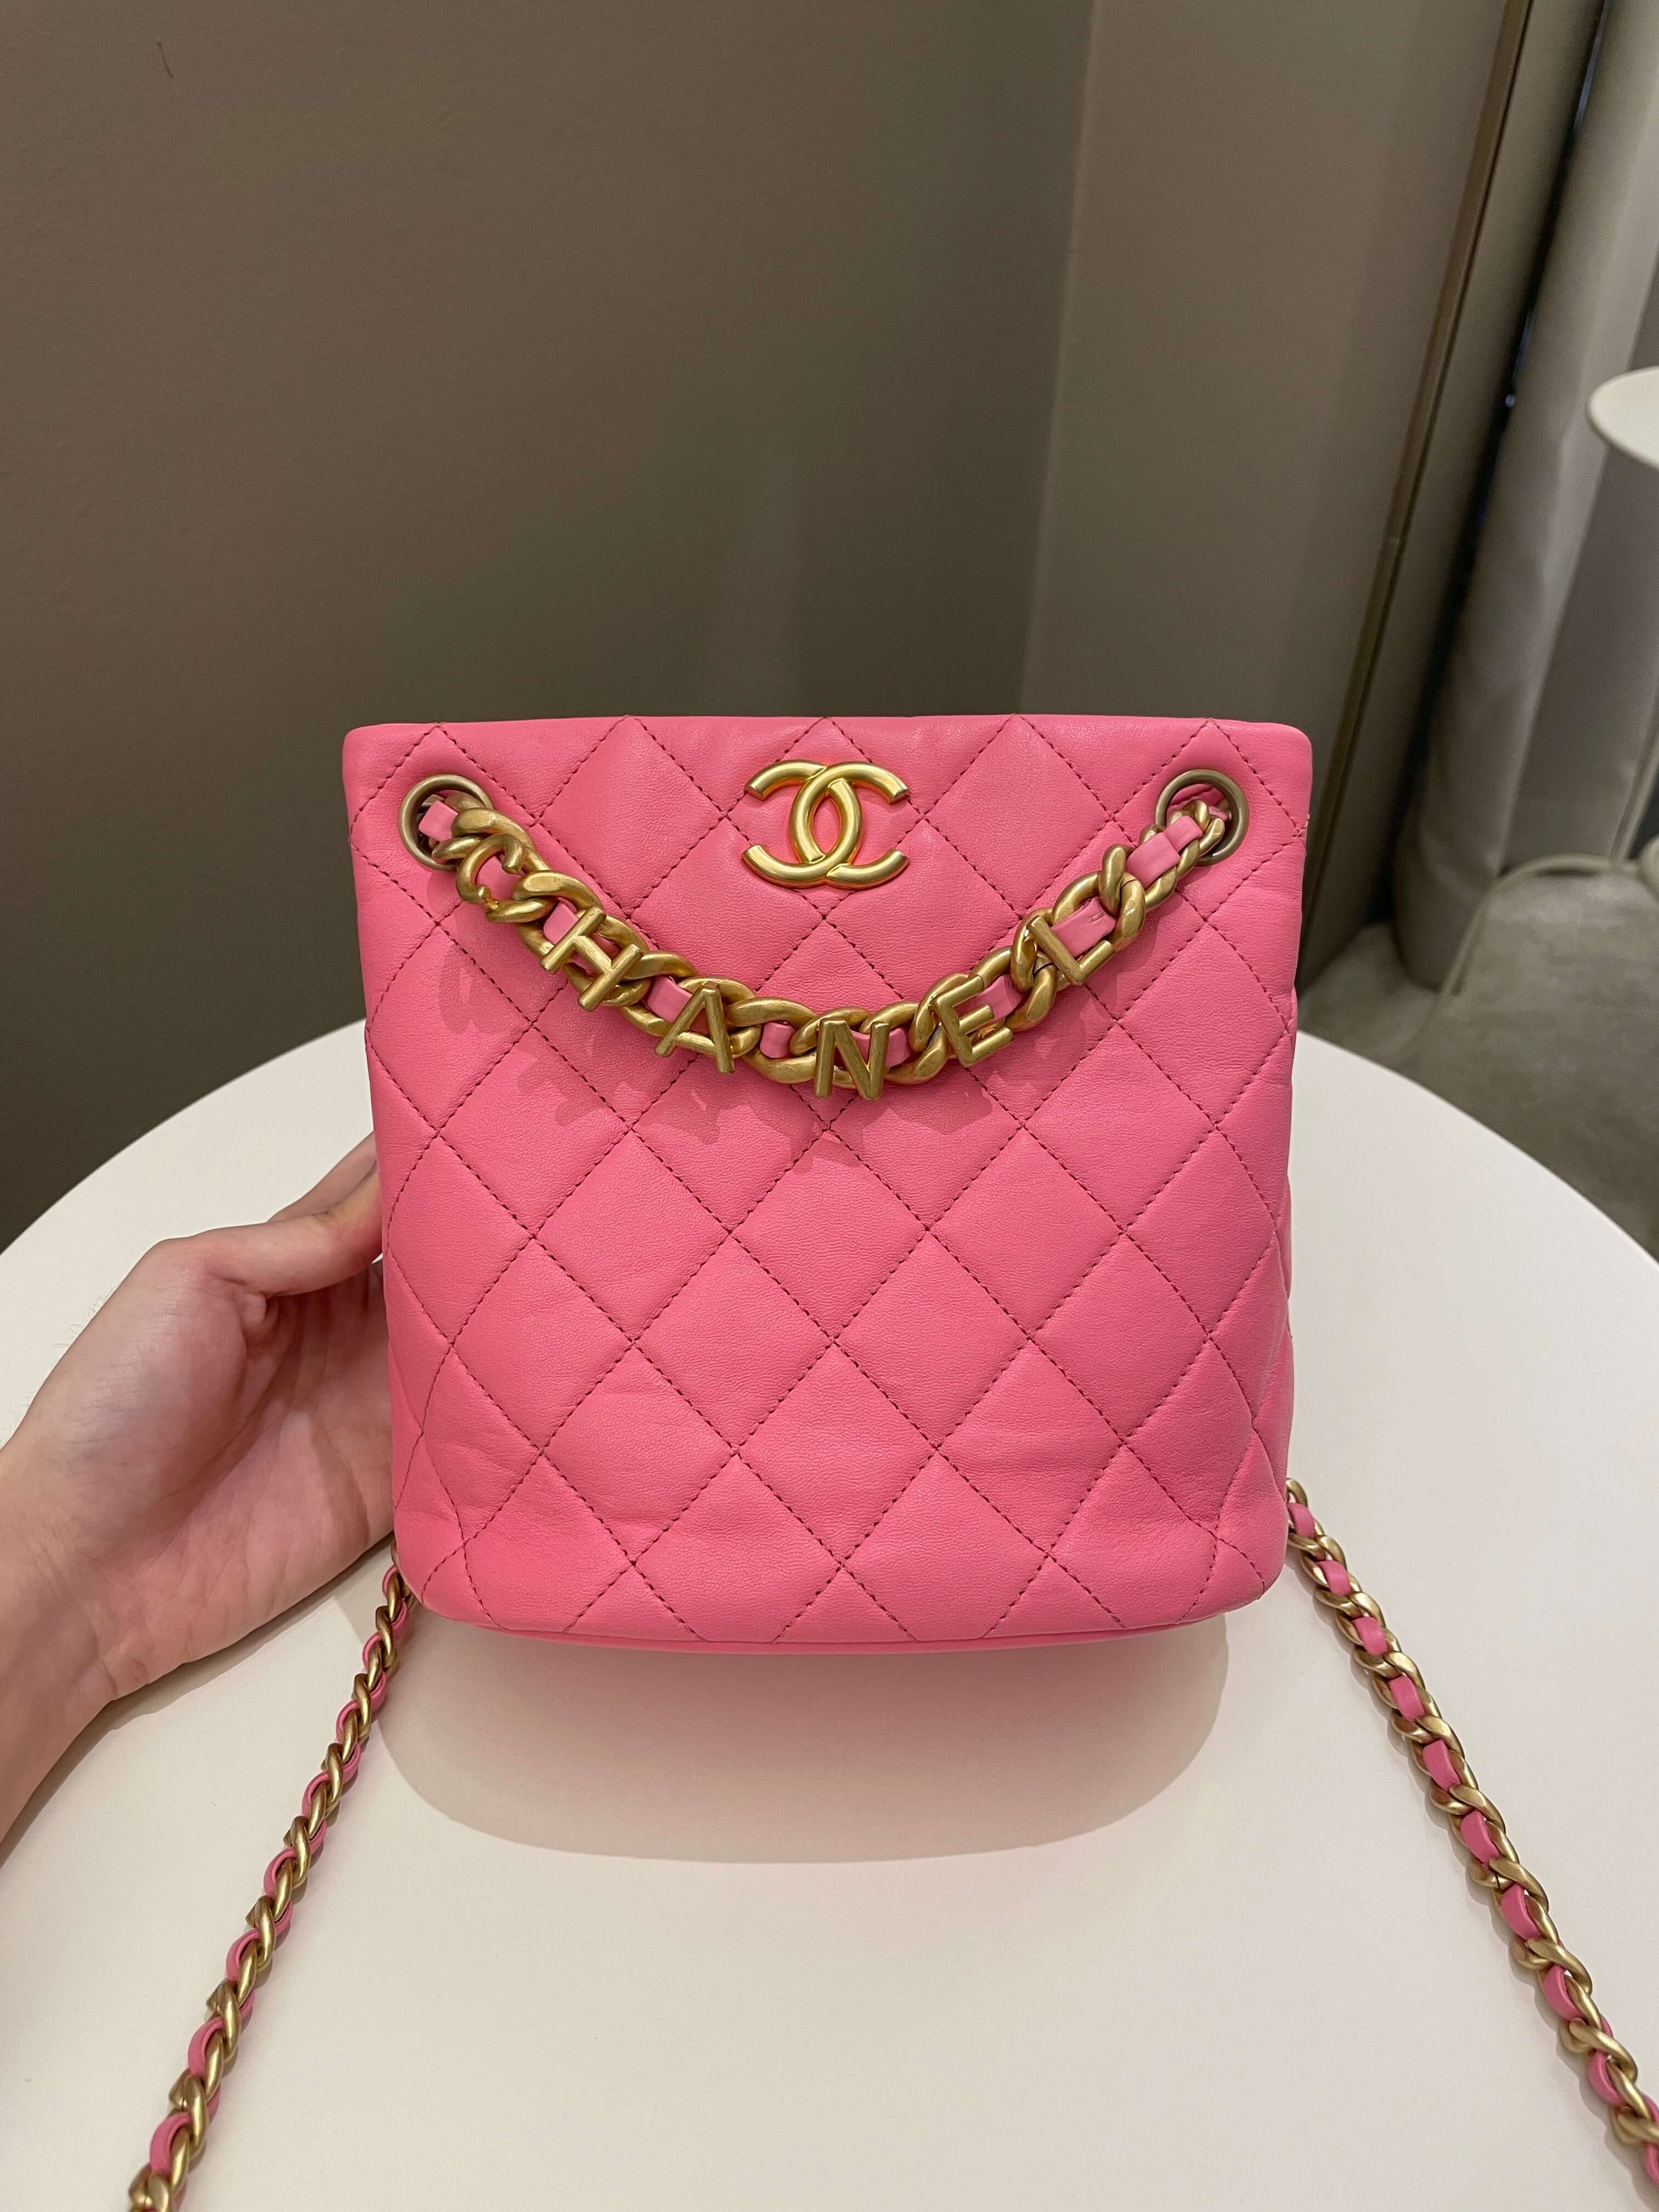 Chanel - Micro Bucket Bag on Chain - AGHW - Brand New